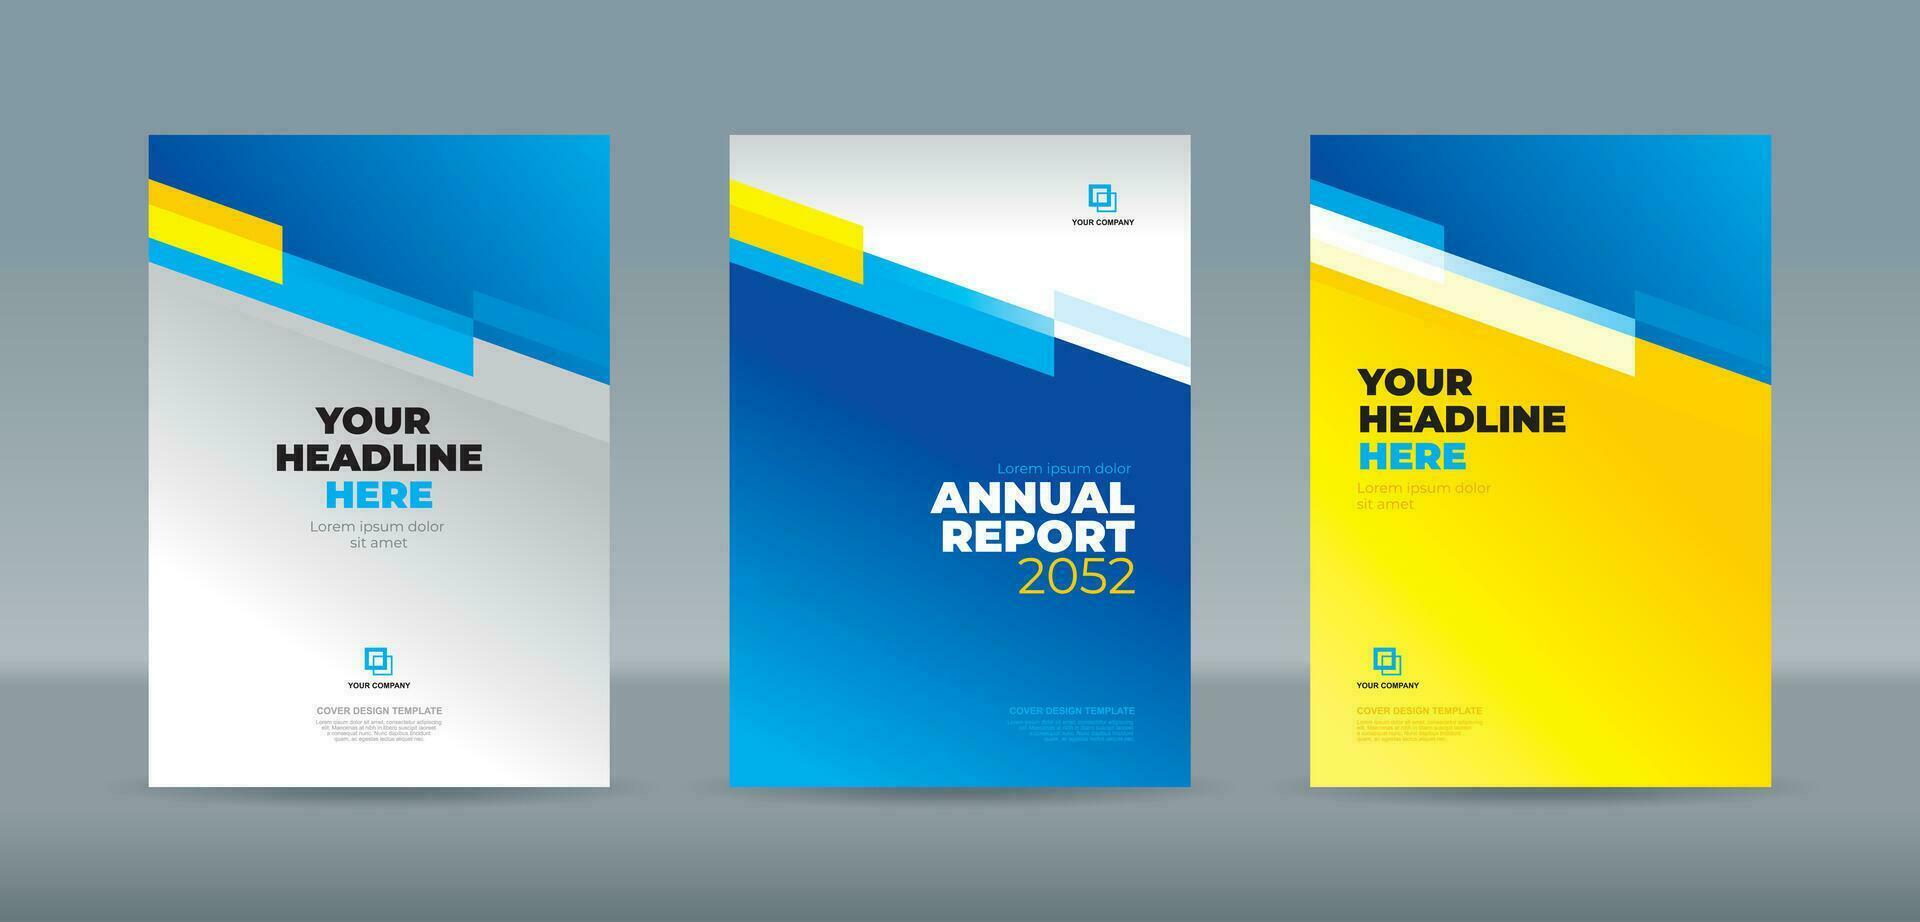 Modern abstract random transparent bar blue yellow white background. A4 size book cover template for annual report, magazine, booklet, proposal, portfolio, brochure, poster vector